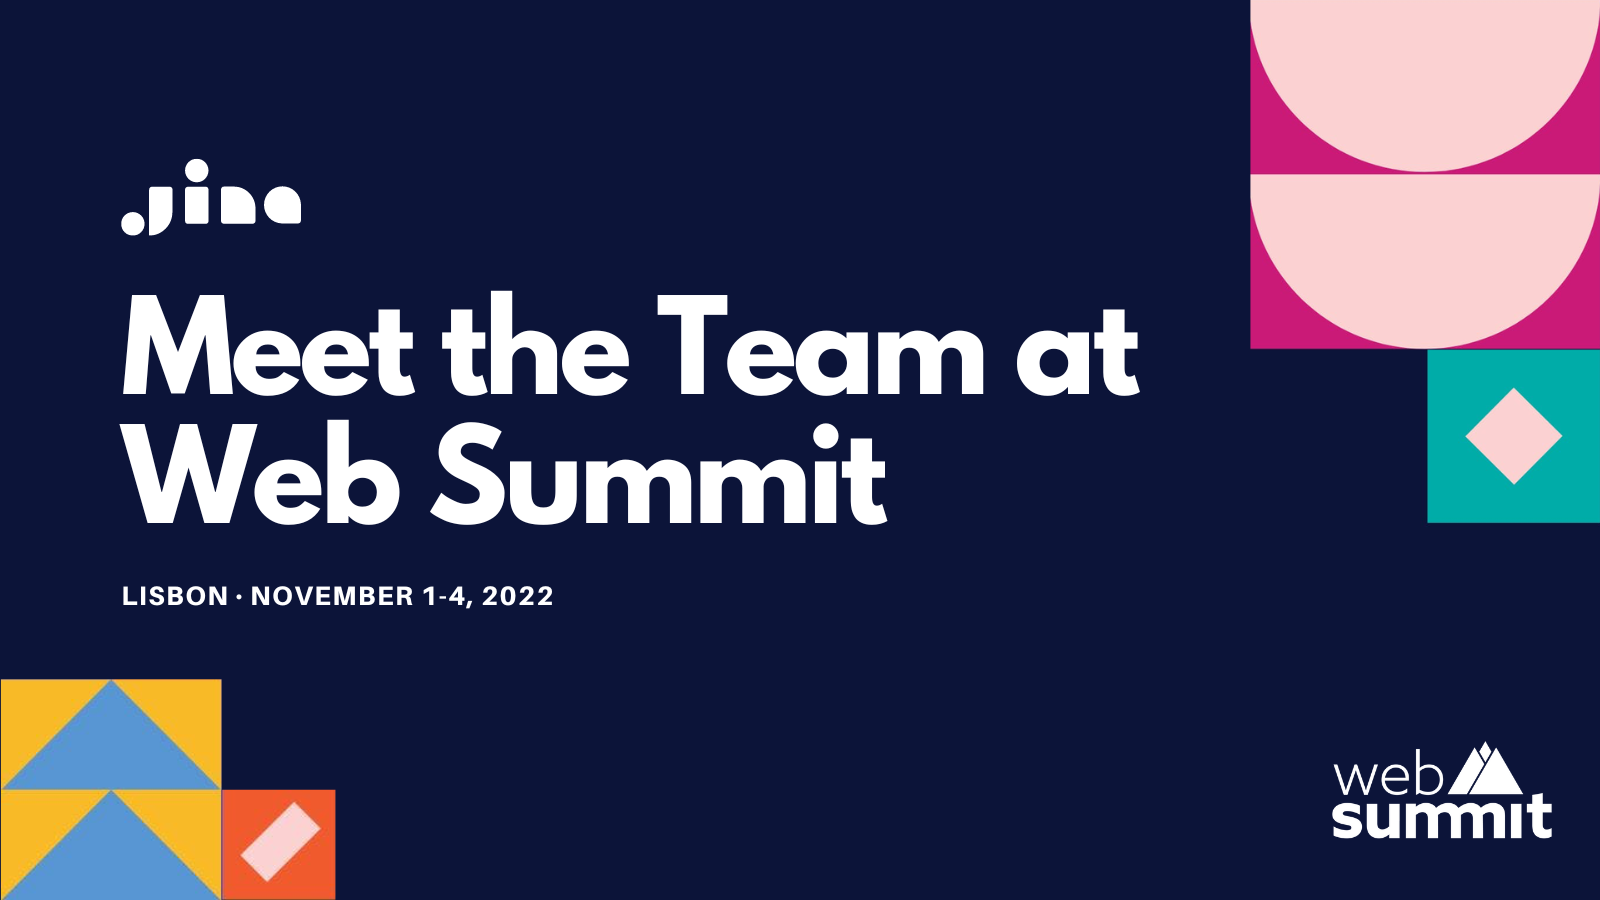 Promotional slide for Web Summit with bold text "Meet the Team" and event date in Lisbon, colorful patterns, and logos